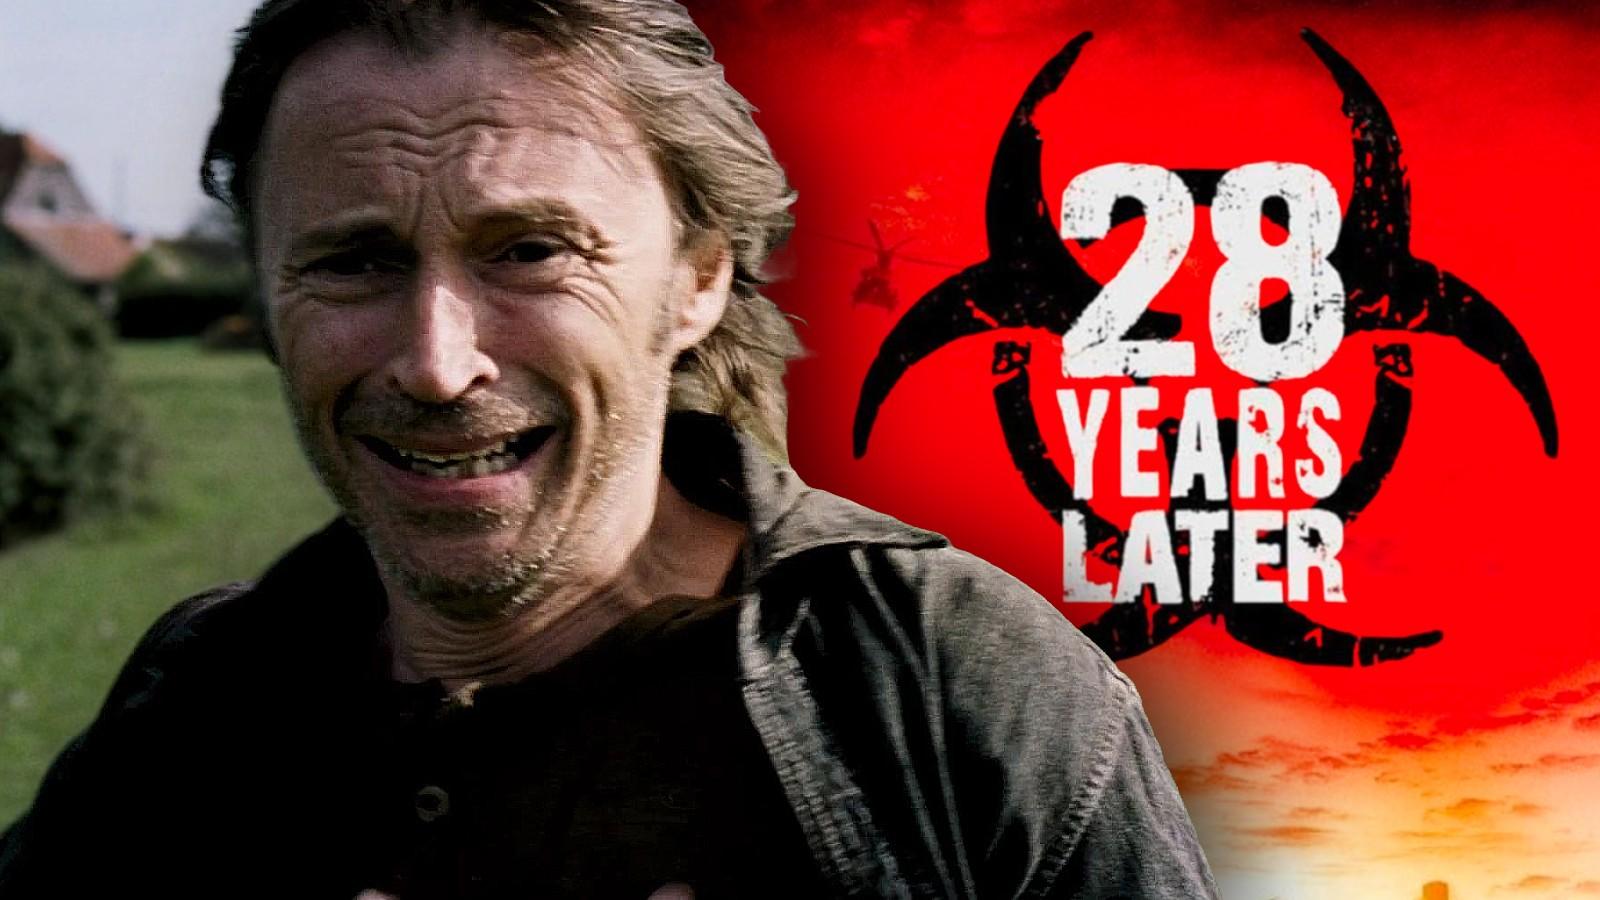 Robert Carlyle in 28 Weeks Later and a mock-up logo for 28 Years Later